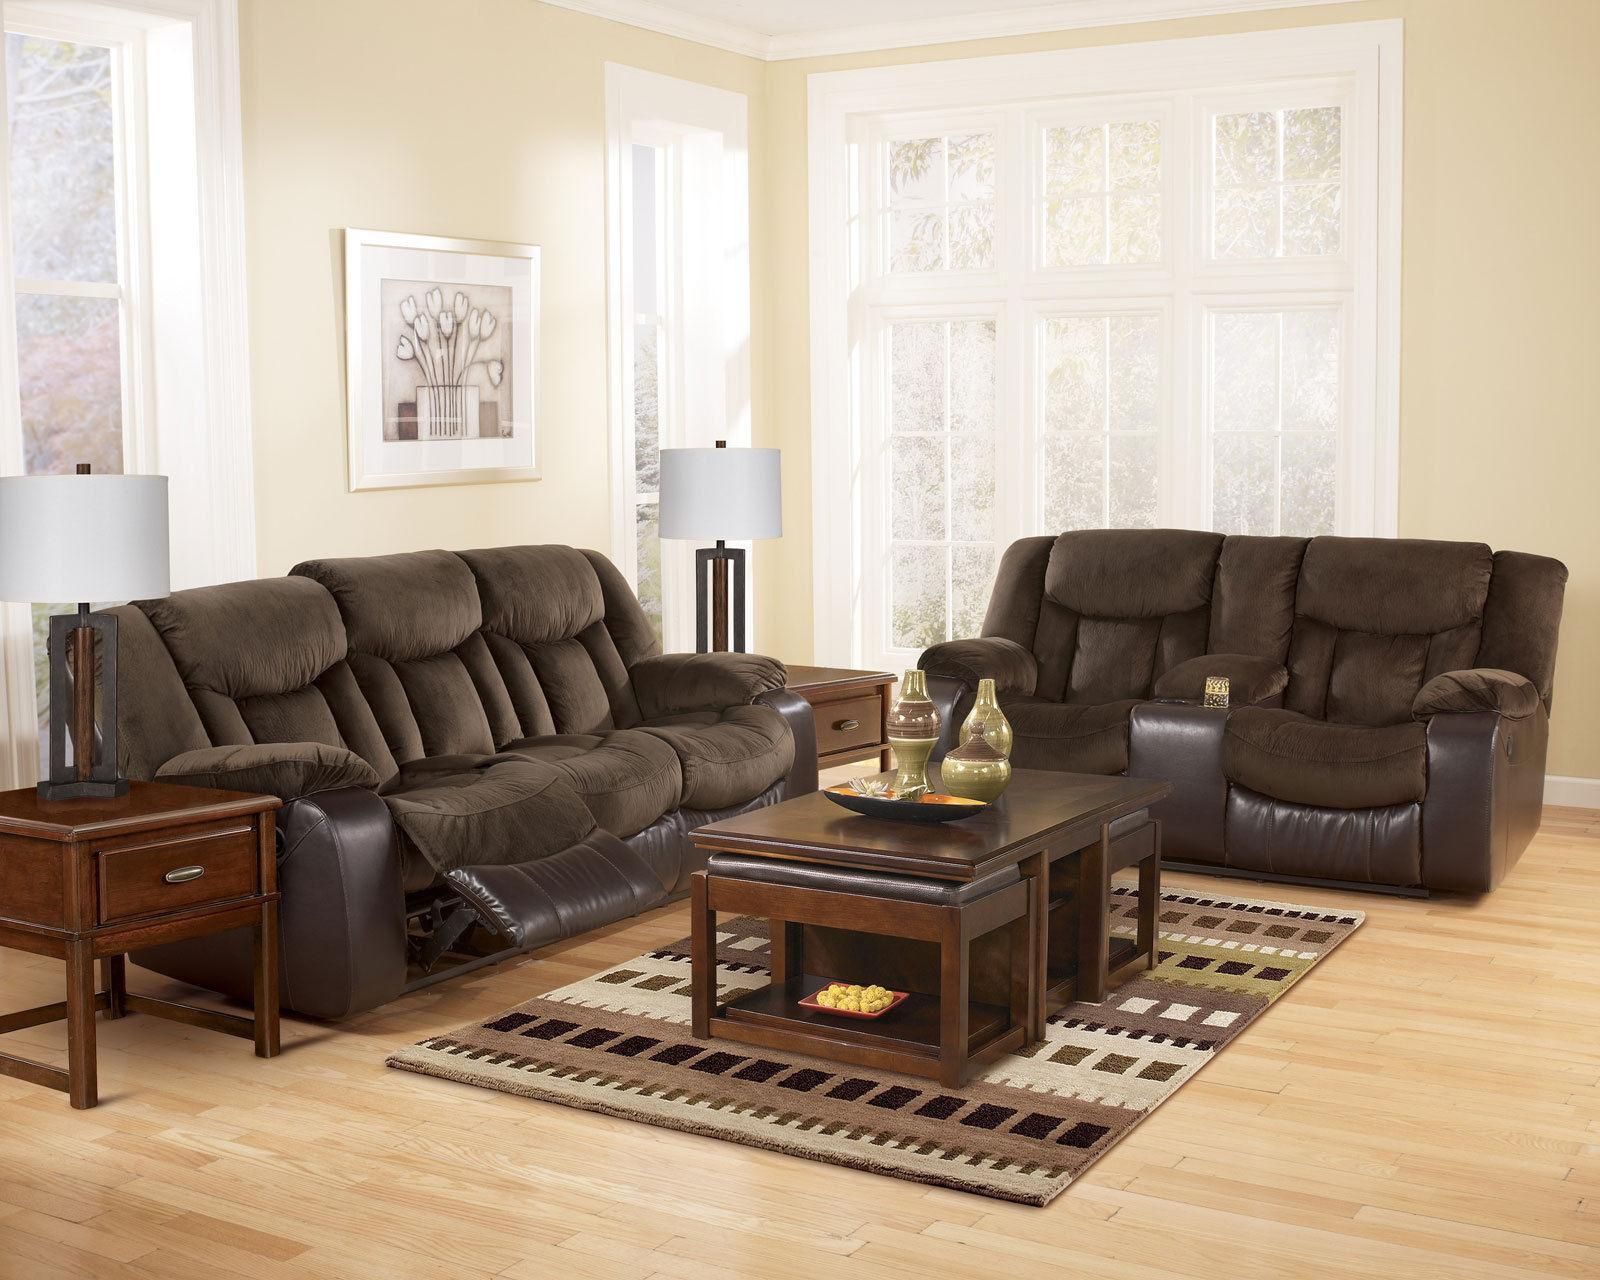 Allegro Living Room Brown Microfiber & Faux Leather Reclining Sofa Inside Faux Leather Sofas In Dark Brown (Gallery 8 of 20)